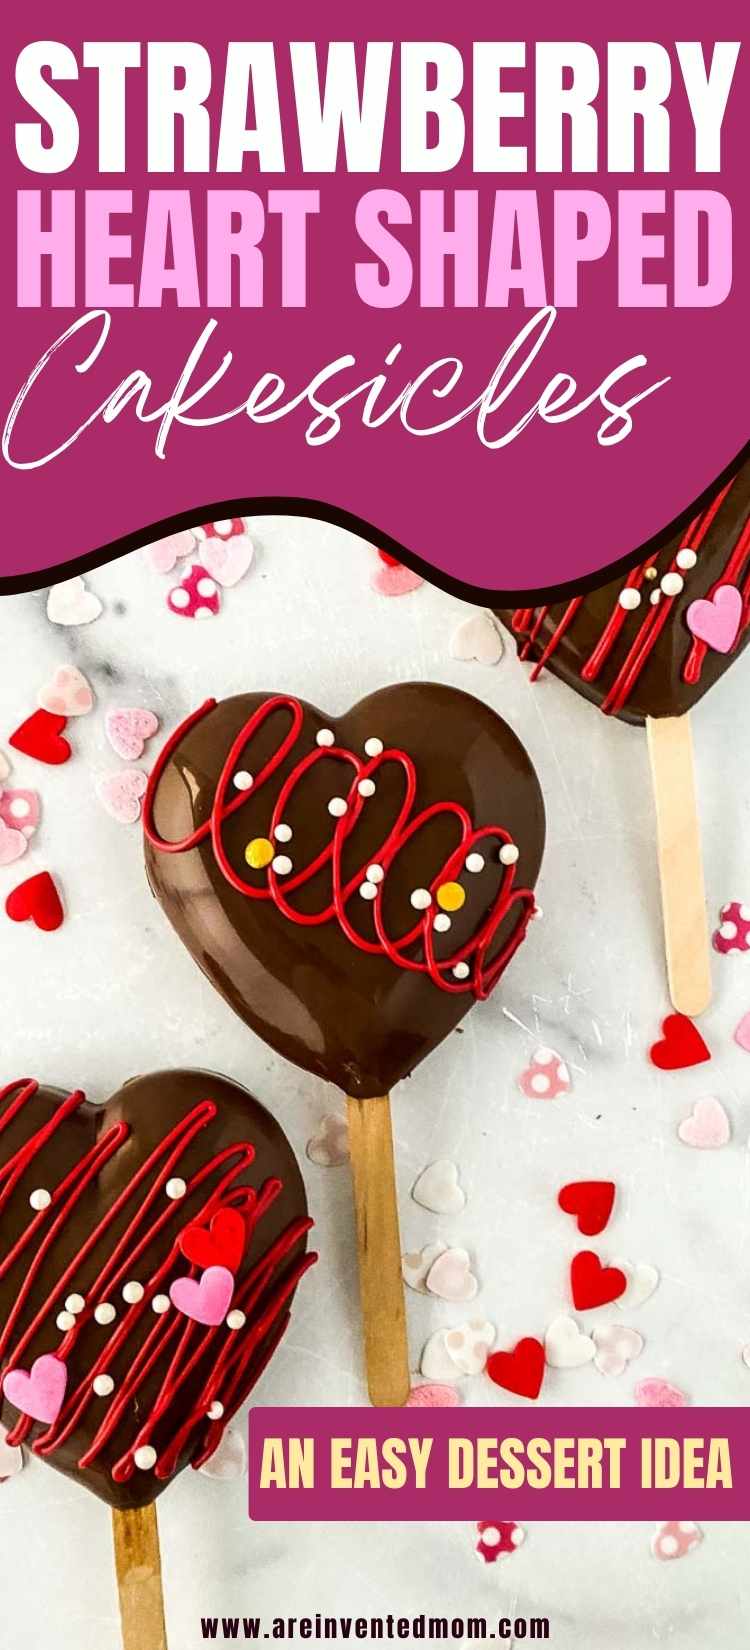 heart cakesicles dipped in chocolate decorated with valentines sprinkles with text overlay